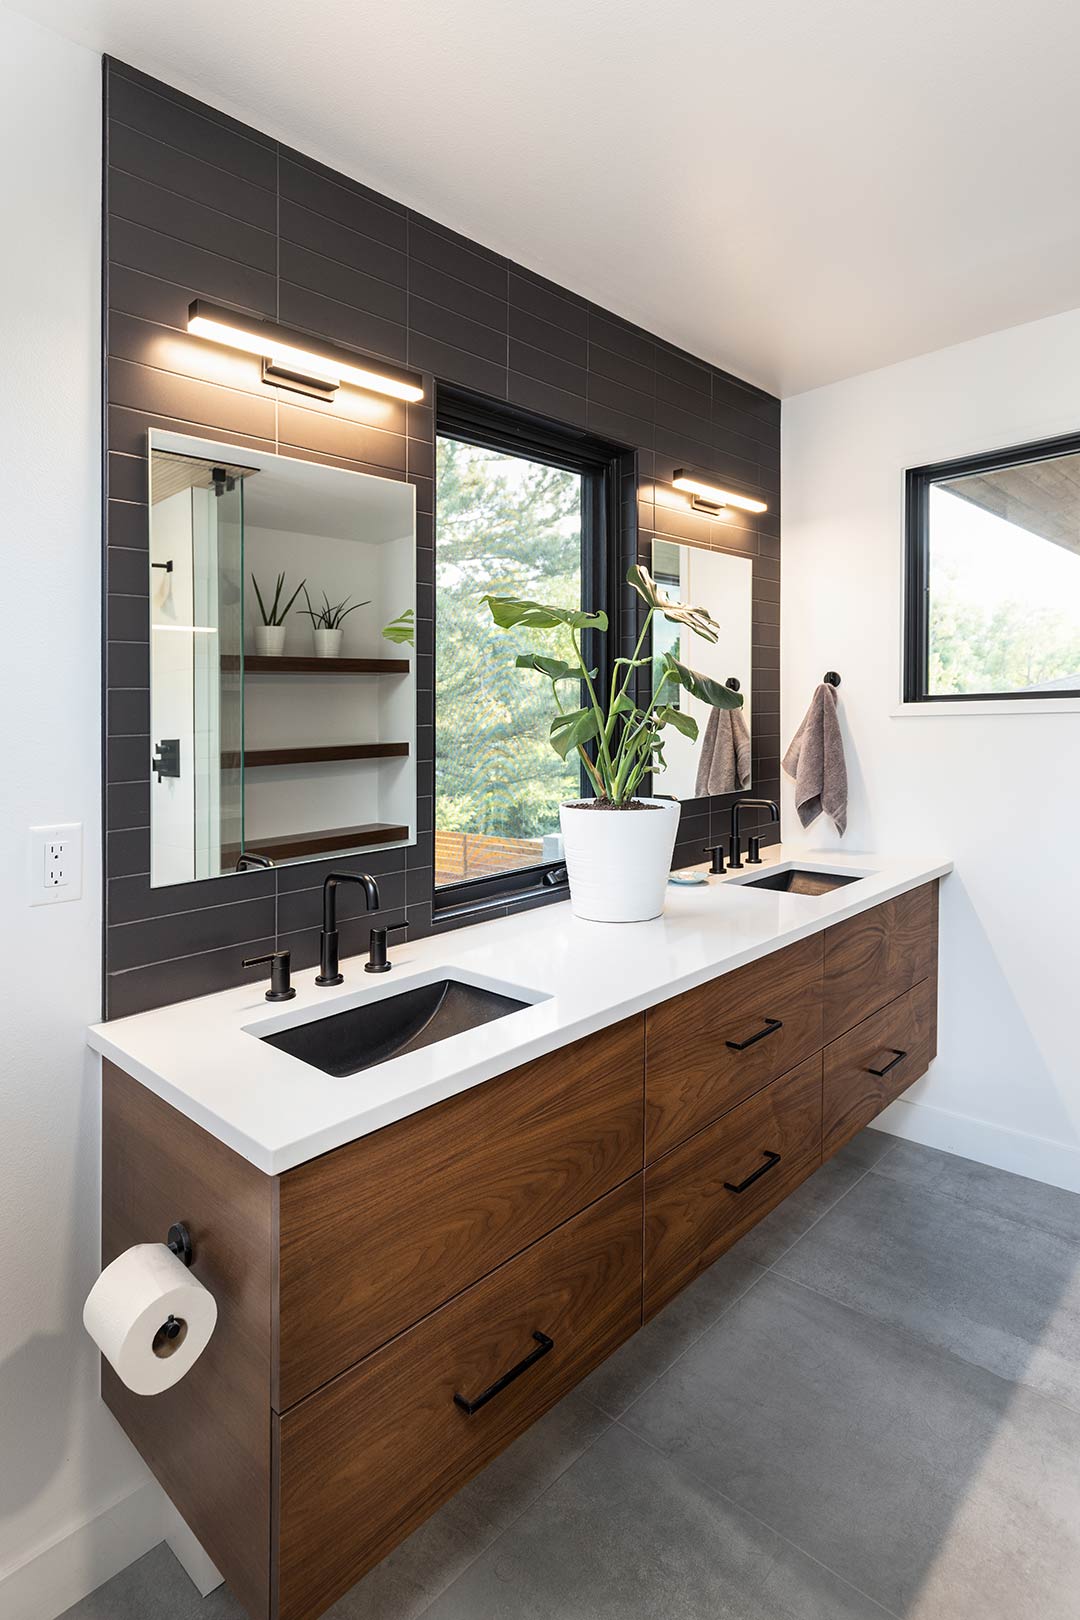 Custom floating vanity with a matte black tile black splash and concrete-look porcelain tile are made even more modern with matte black fixtures and pulls.